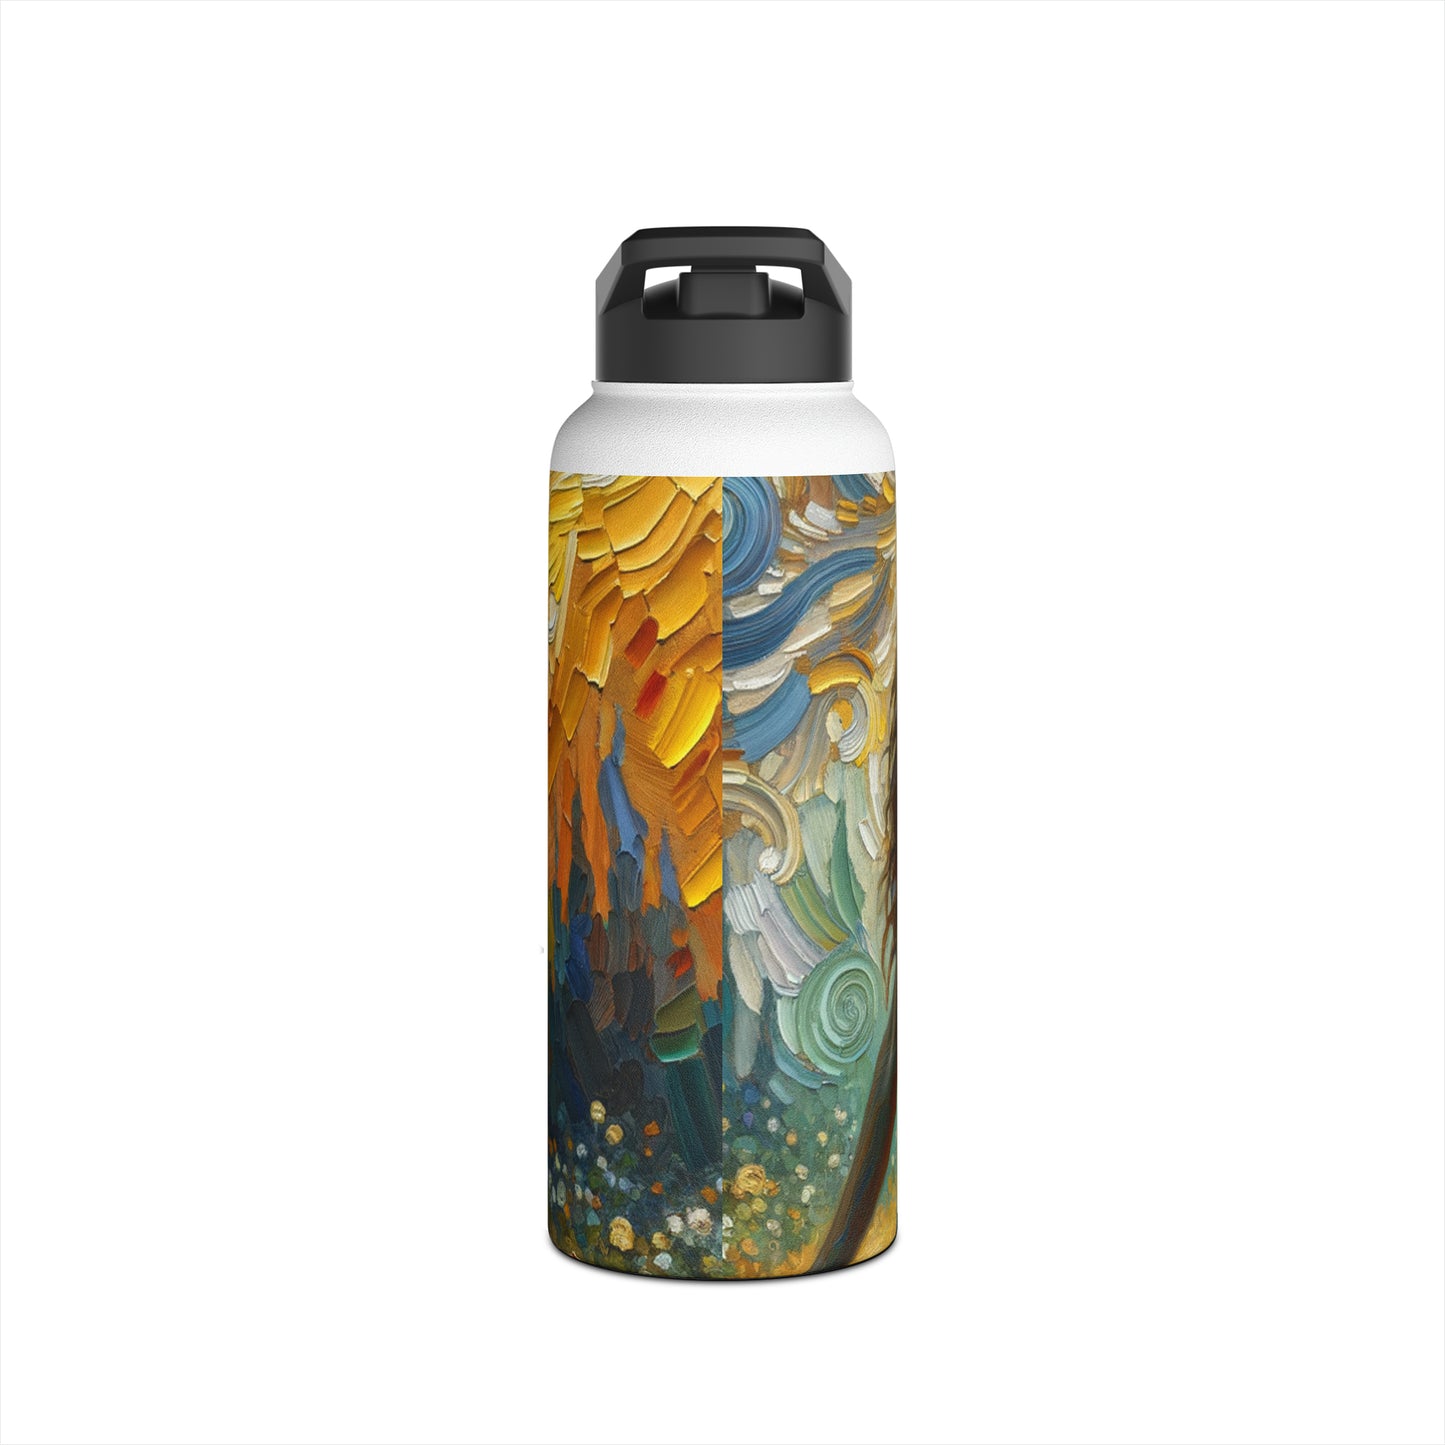 "Golden Warrior: A Tranquil Harmony" - Water Bottle